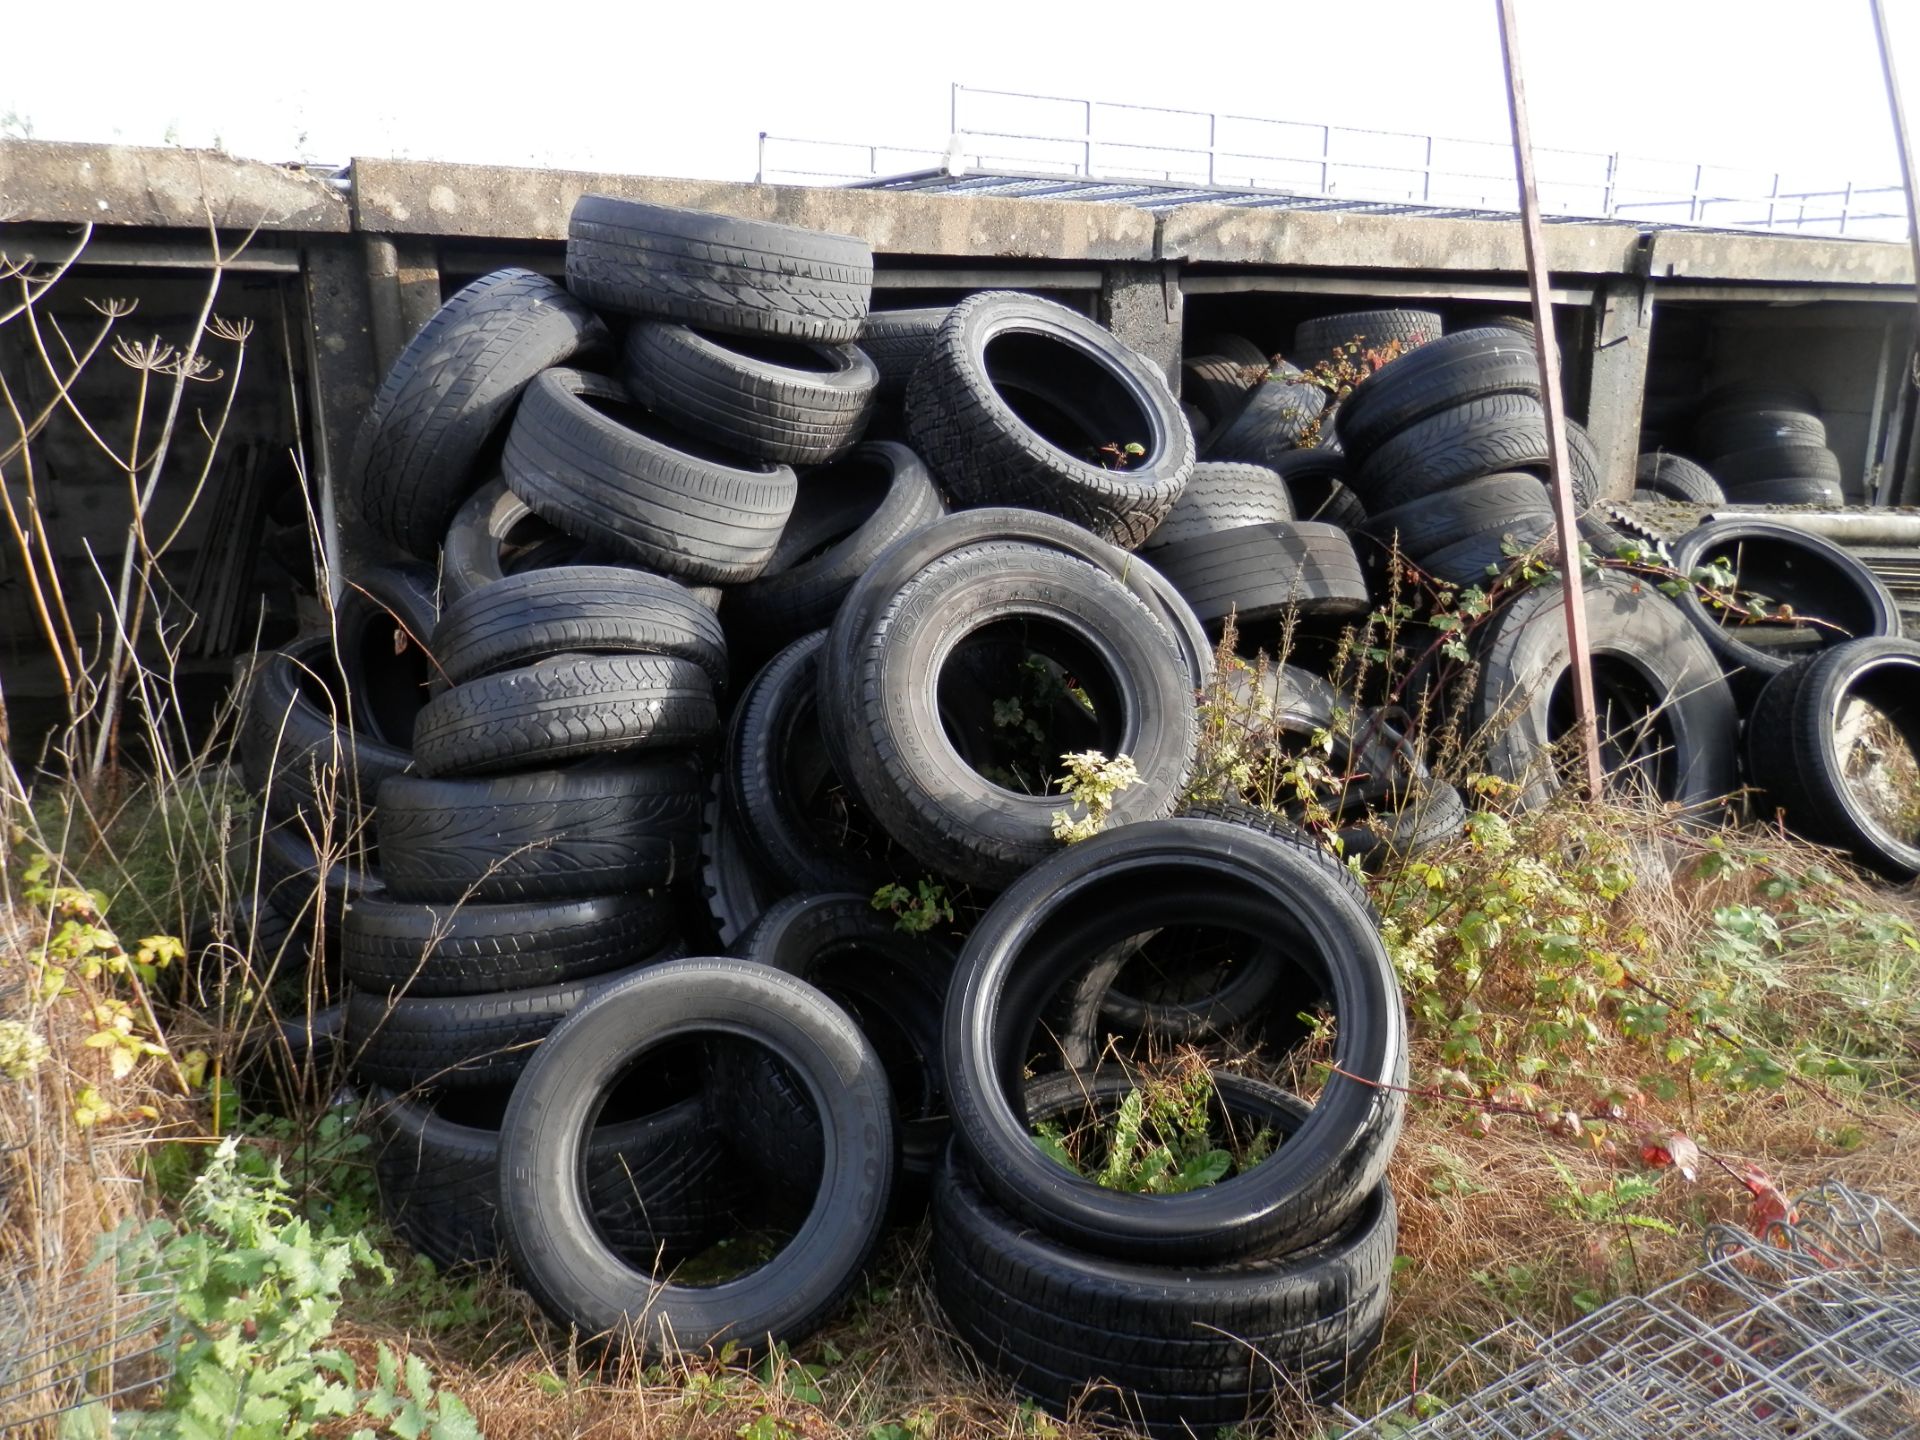 3 GARAGES FULL OF USED, PART WORN TYRES. ASSORTED FROM CAR TO LORRY TYRES. POSSIBLY 800+ - Image 6 of 9